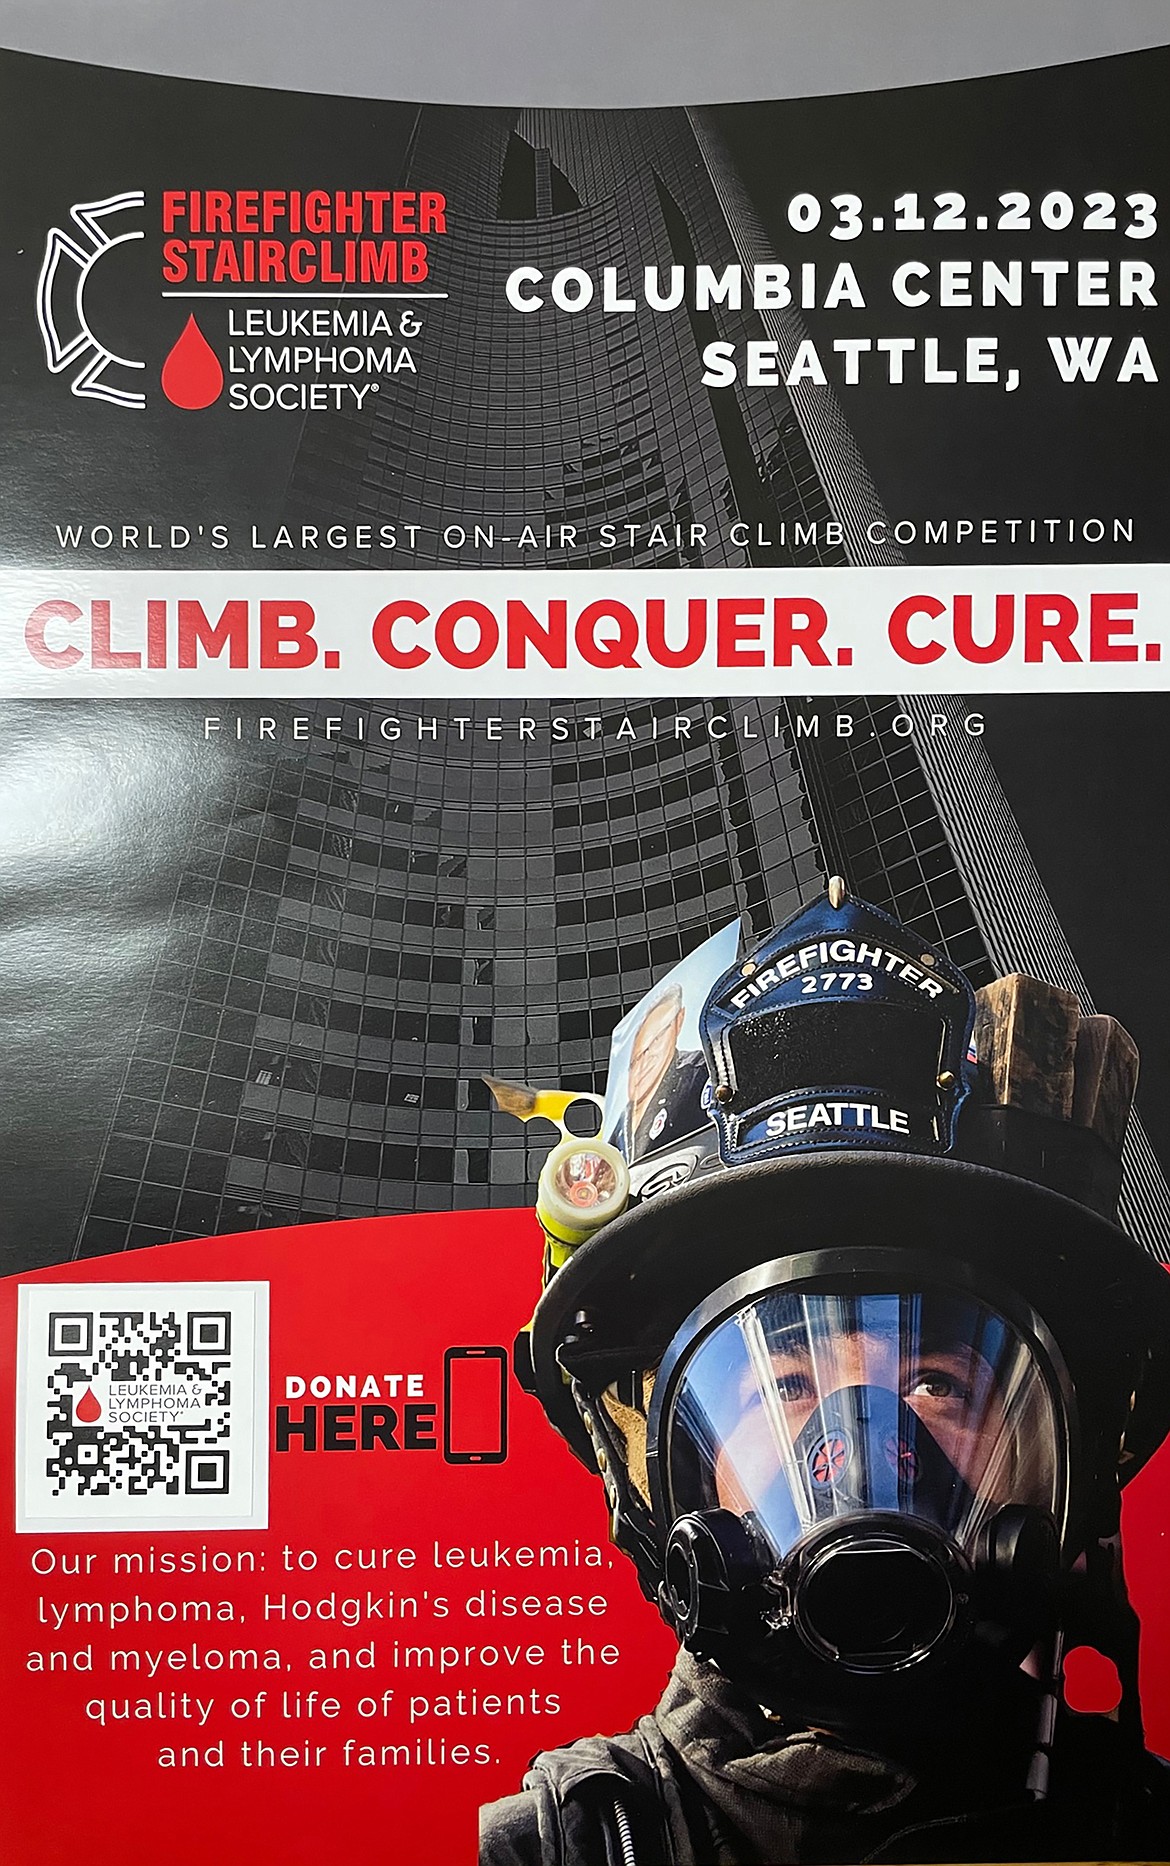 Members of the Northside and Selkirk fire departments will be taking part in the Scott Firefighter Stairclimb will be held March 12.